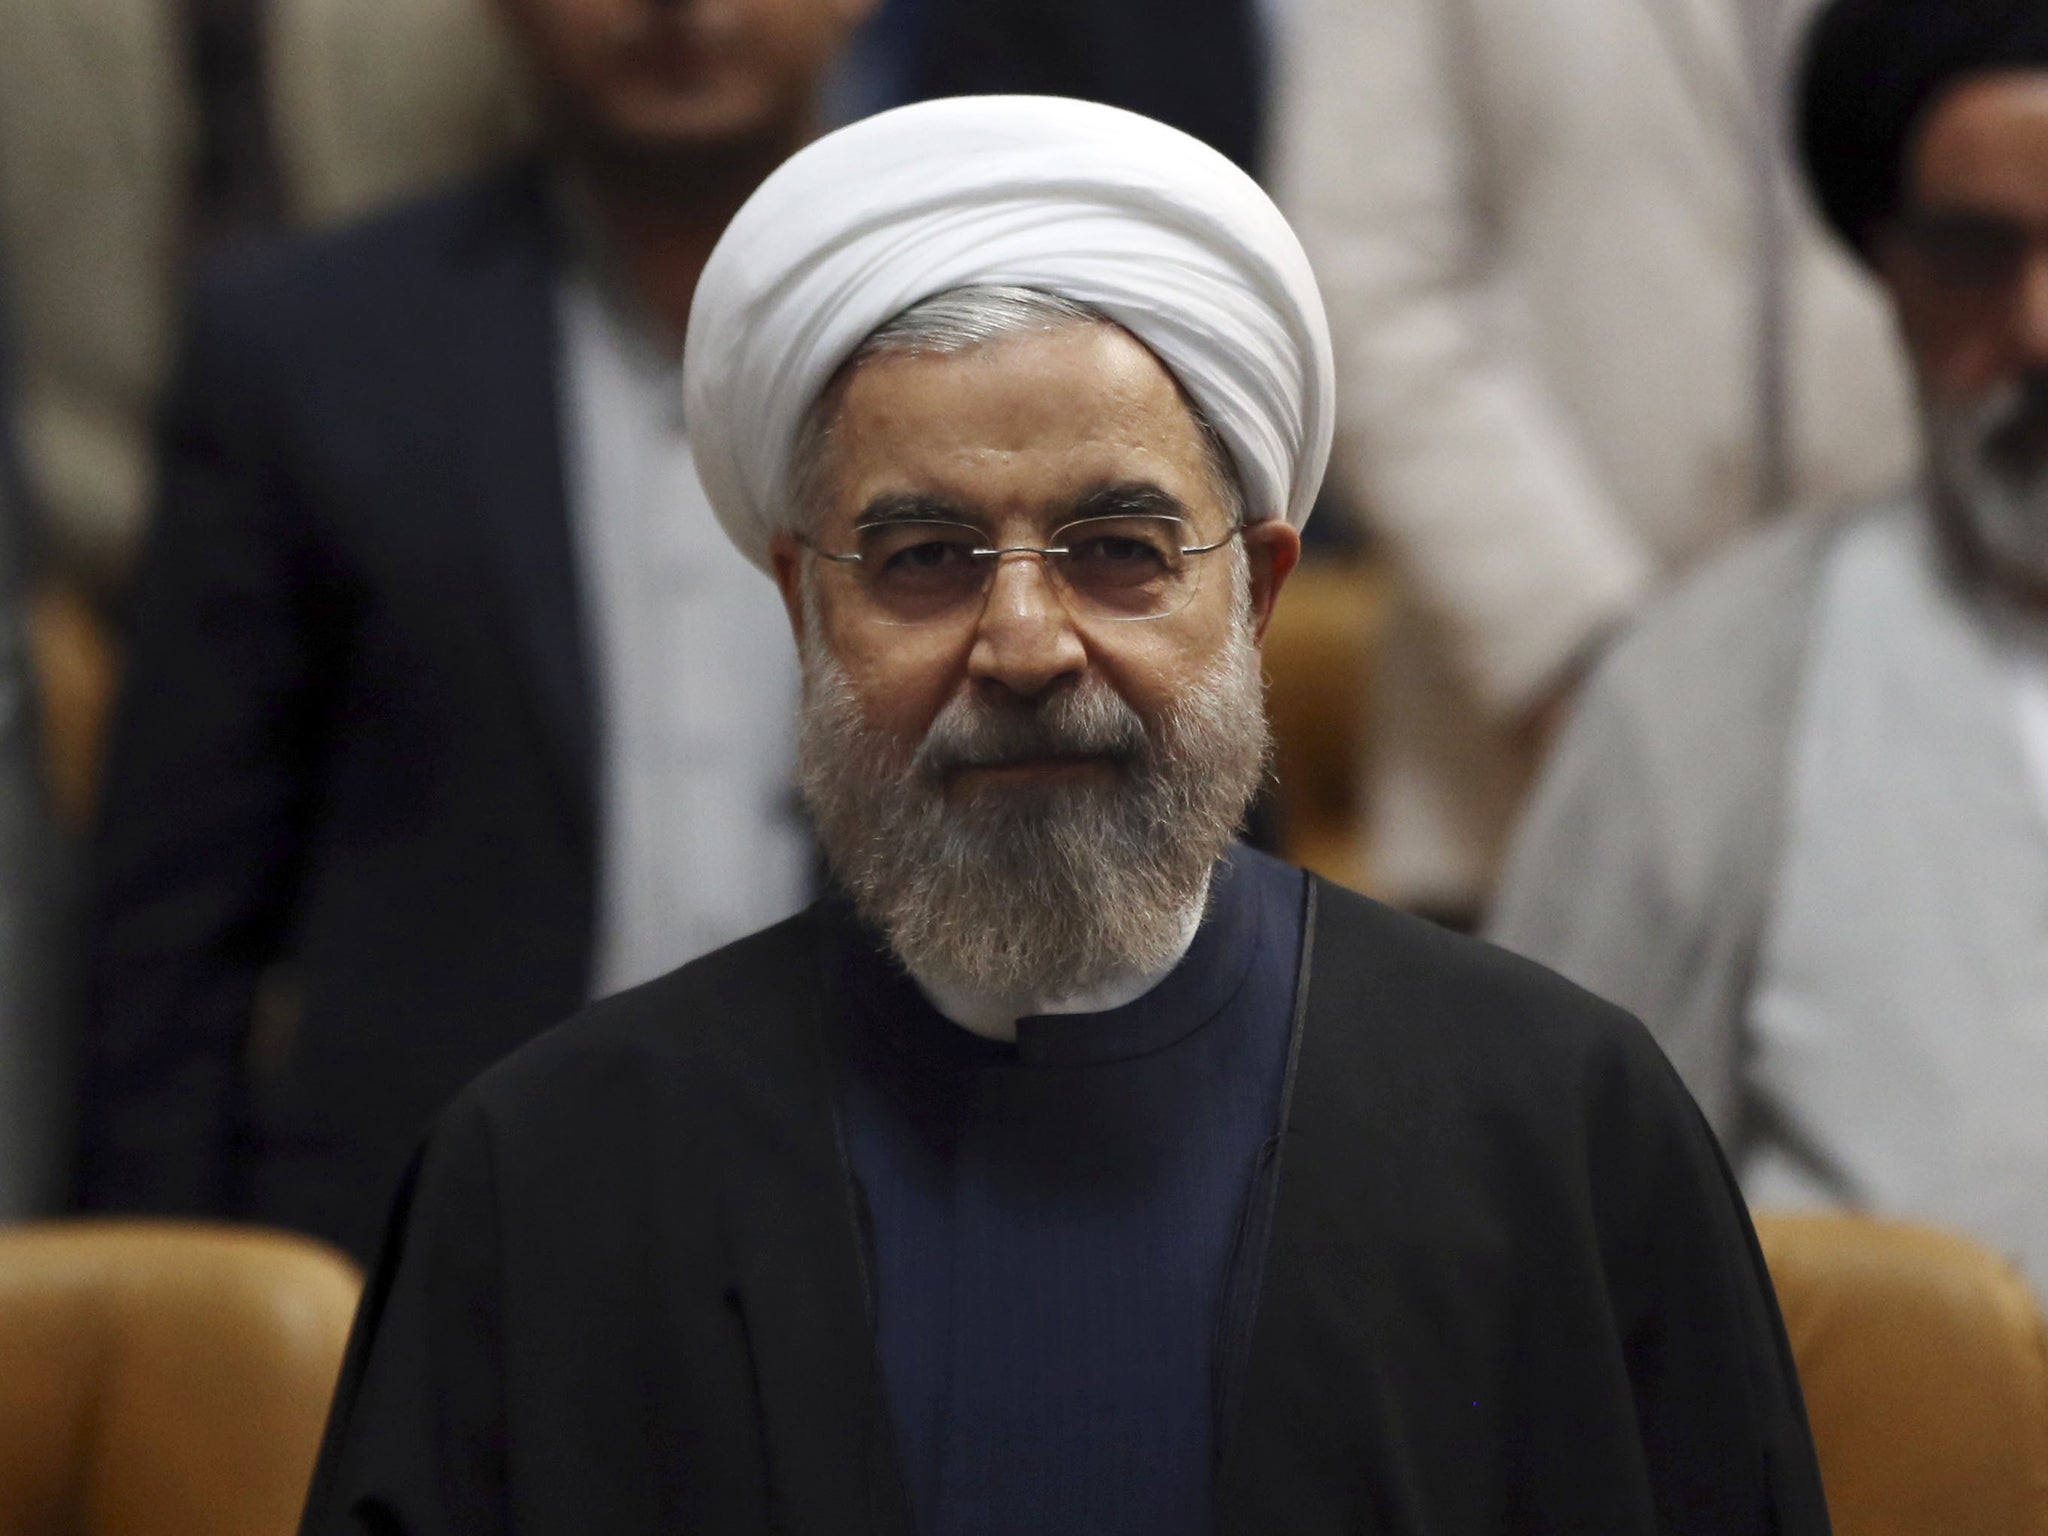 Iranian President Hassan Rouhani yesterday; he called for a ceasefire and a negotiated end to the conflict